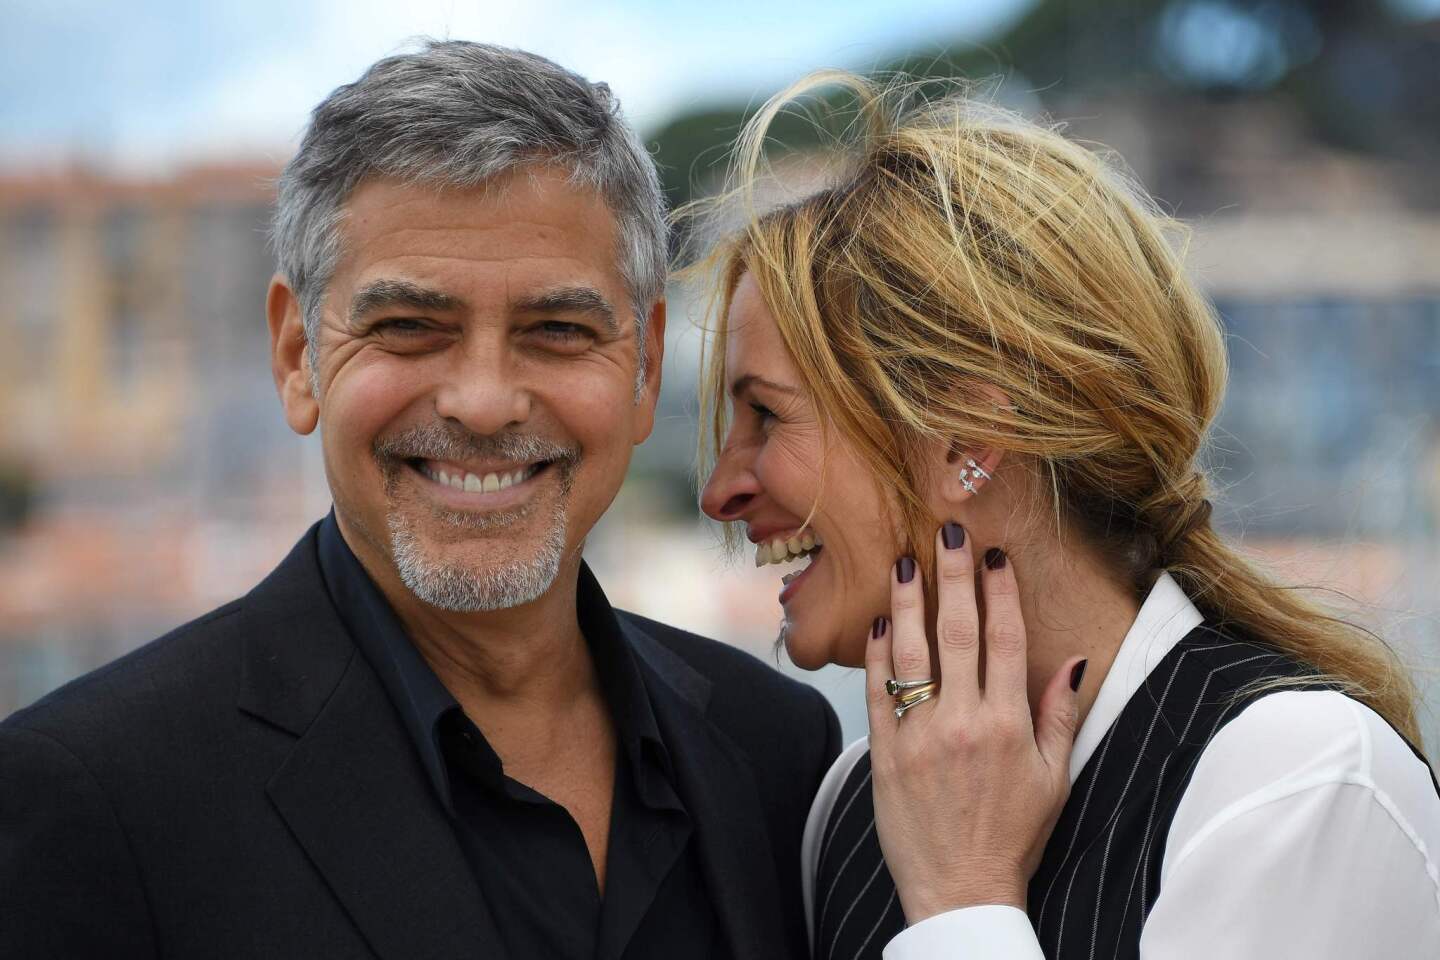 George Clooney and Julia Roberts at the Cannes photo call for "Money Monster."